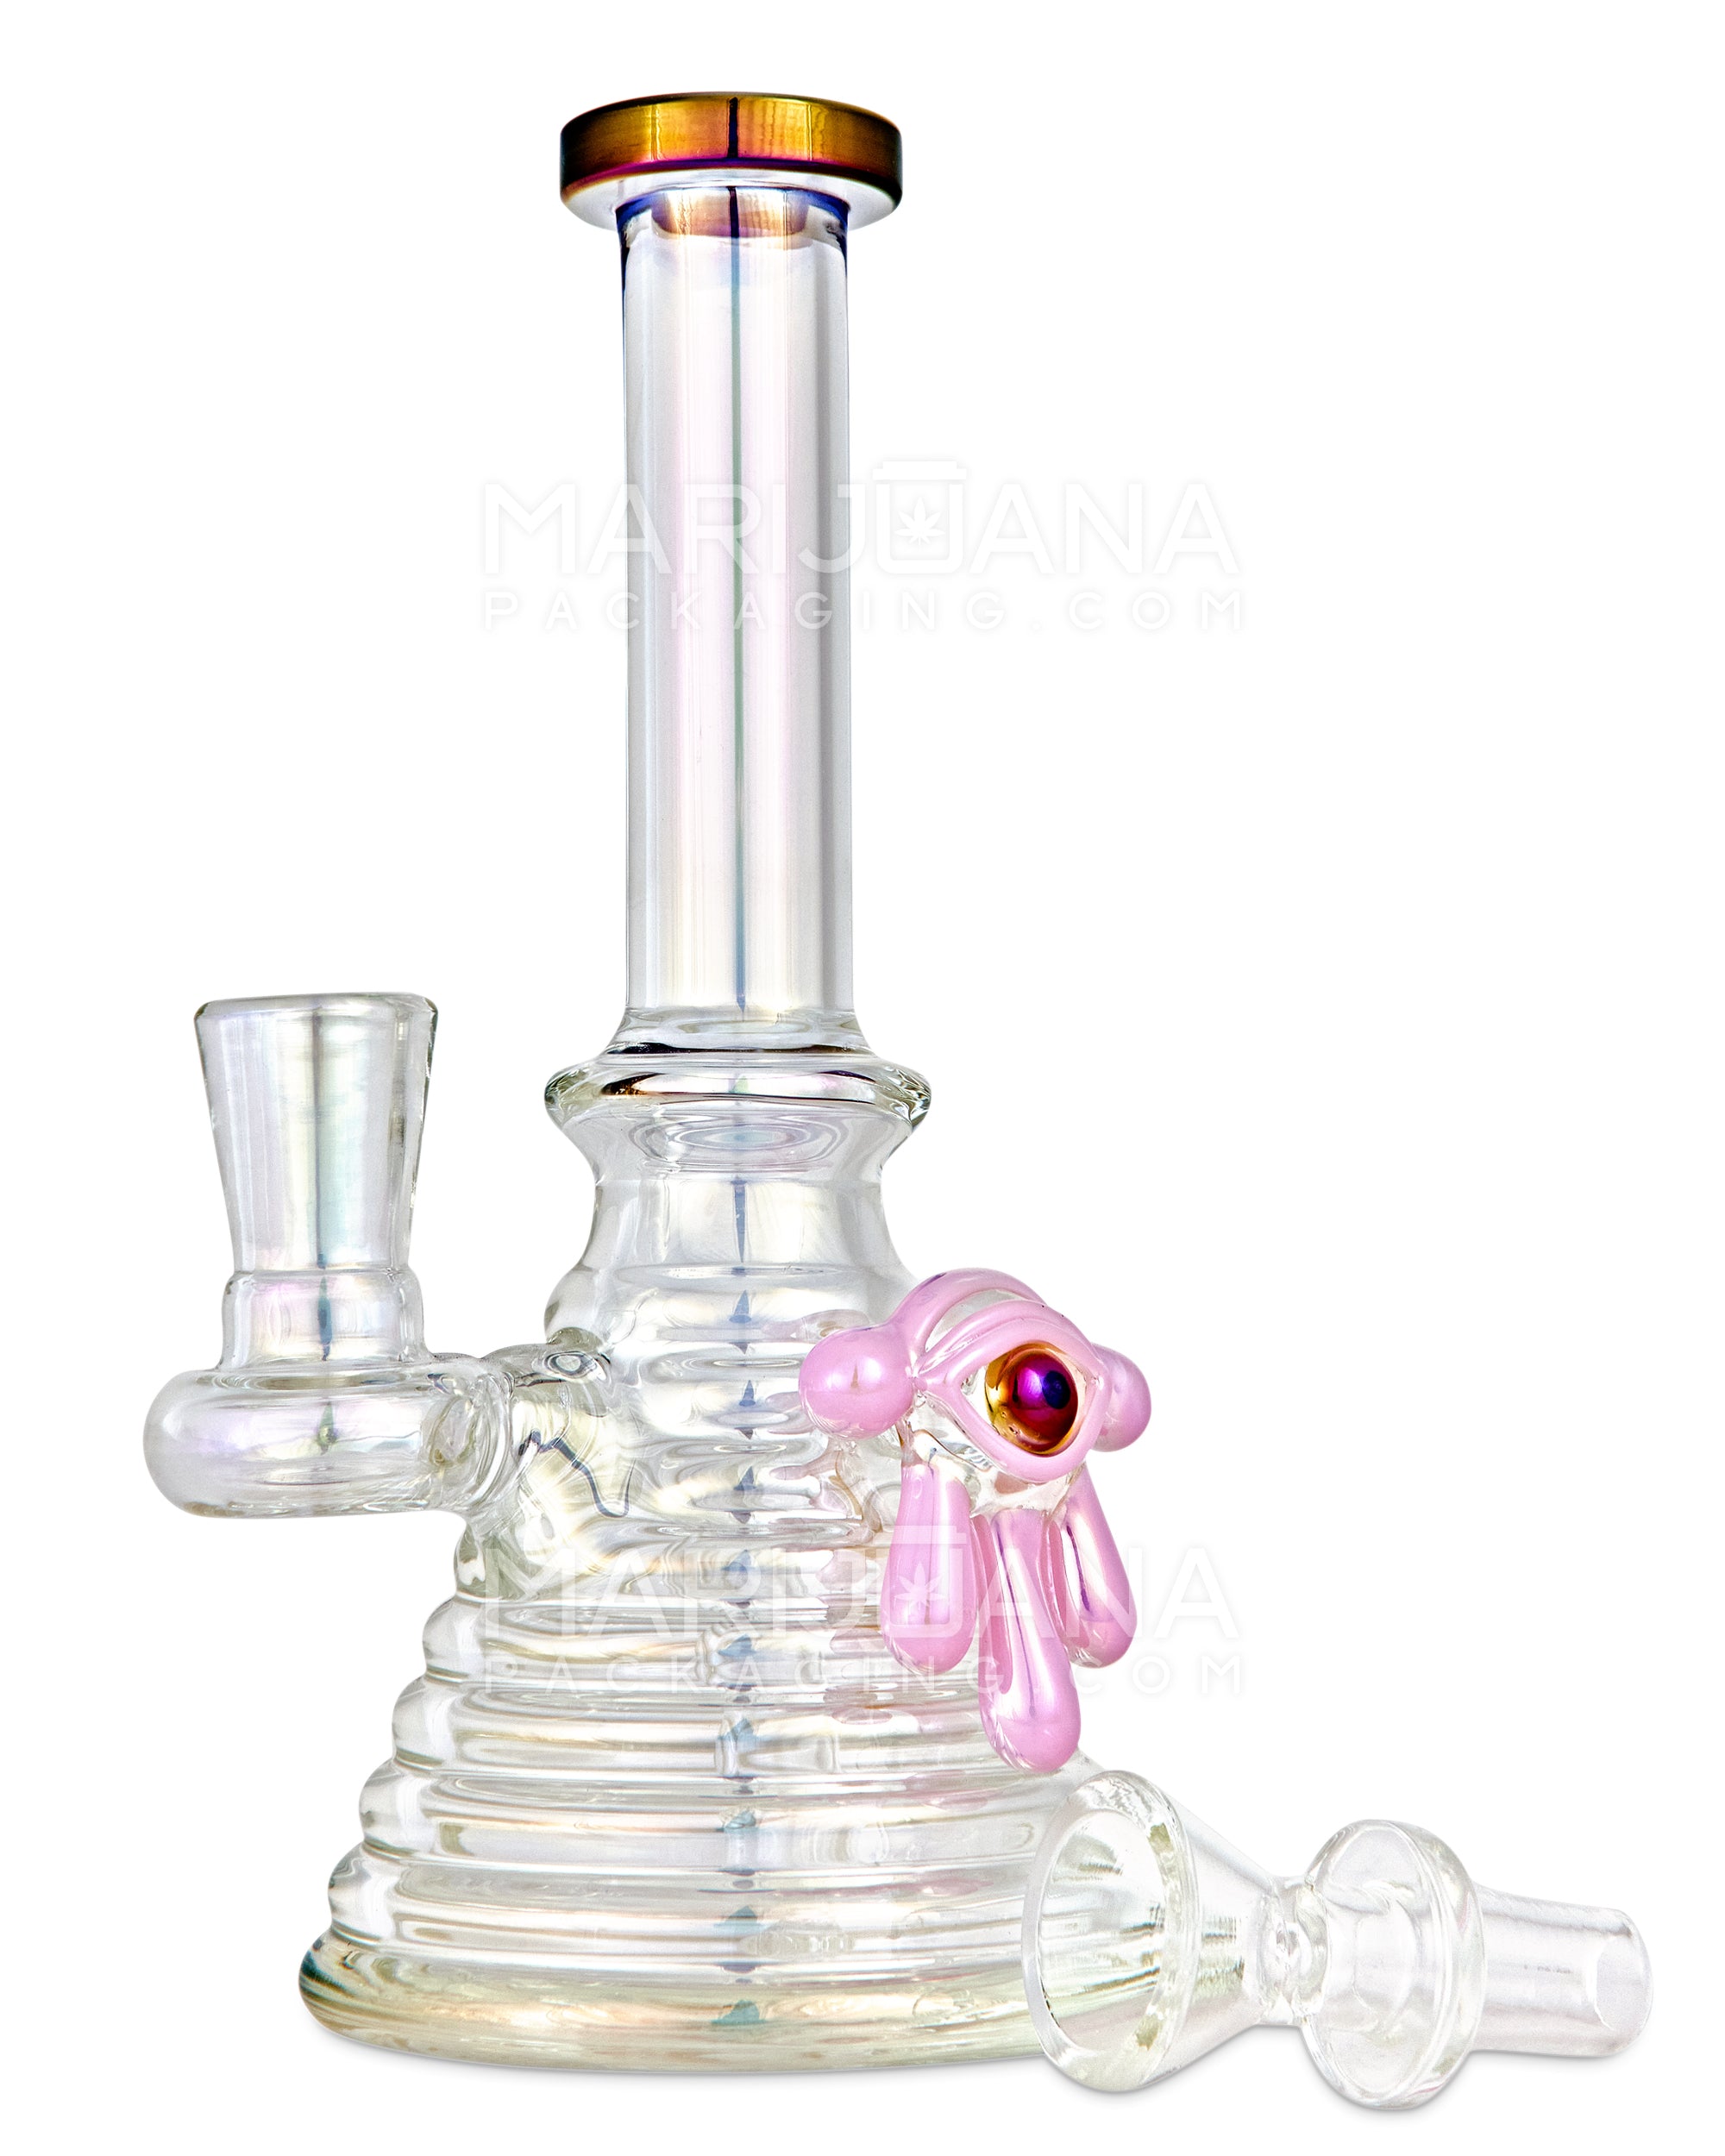 Straight Neck Diffused Perc Glass Ribbed Beaker Water Pipe w/ Pink Evil Eye | 7.5in Tall - 14mm Bowl - Iridescent - 2